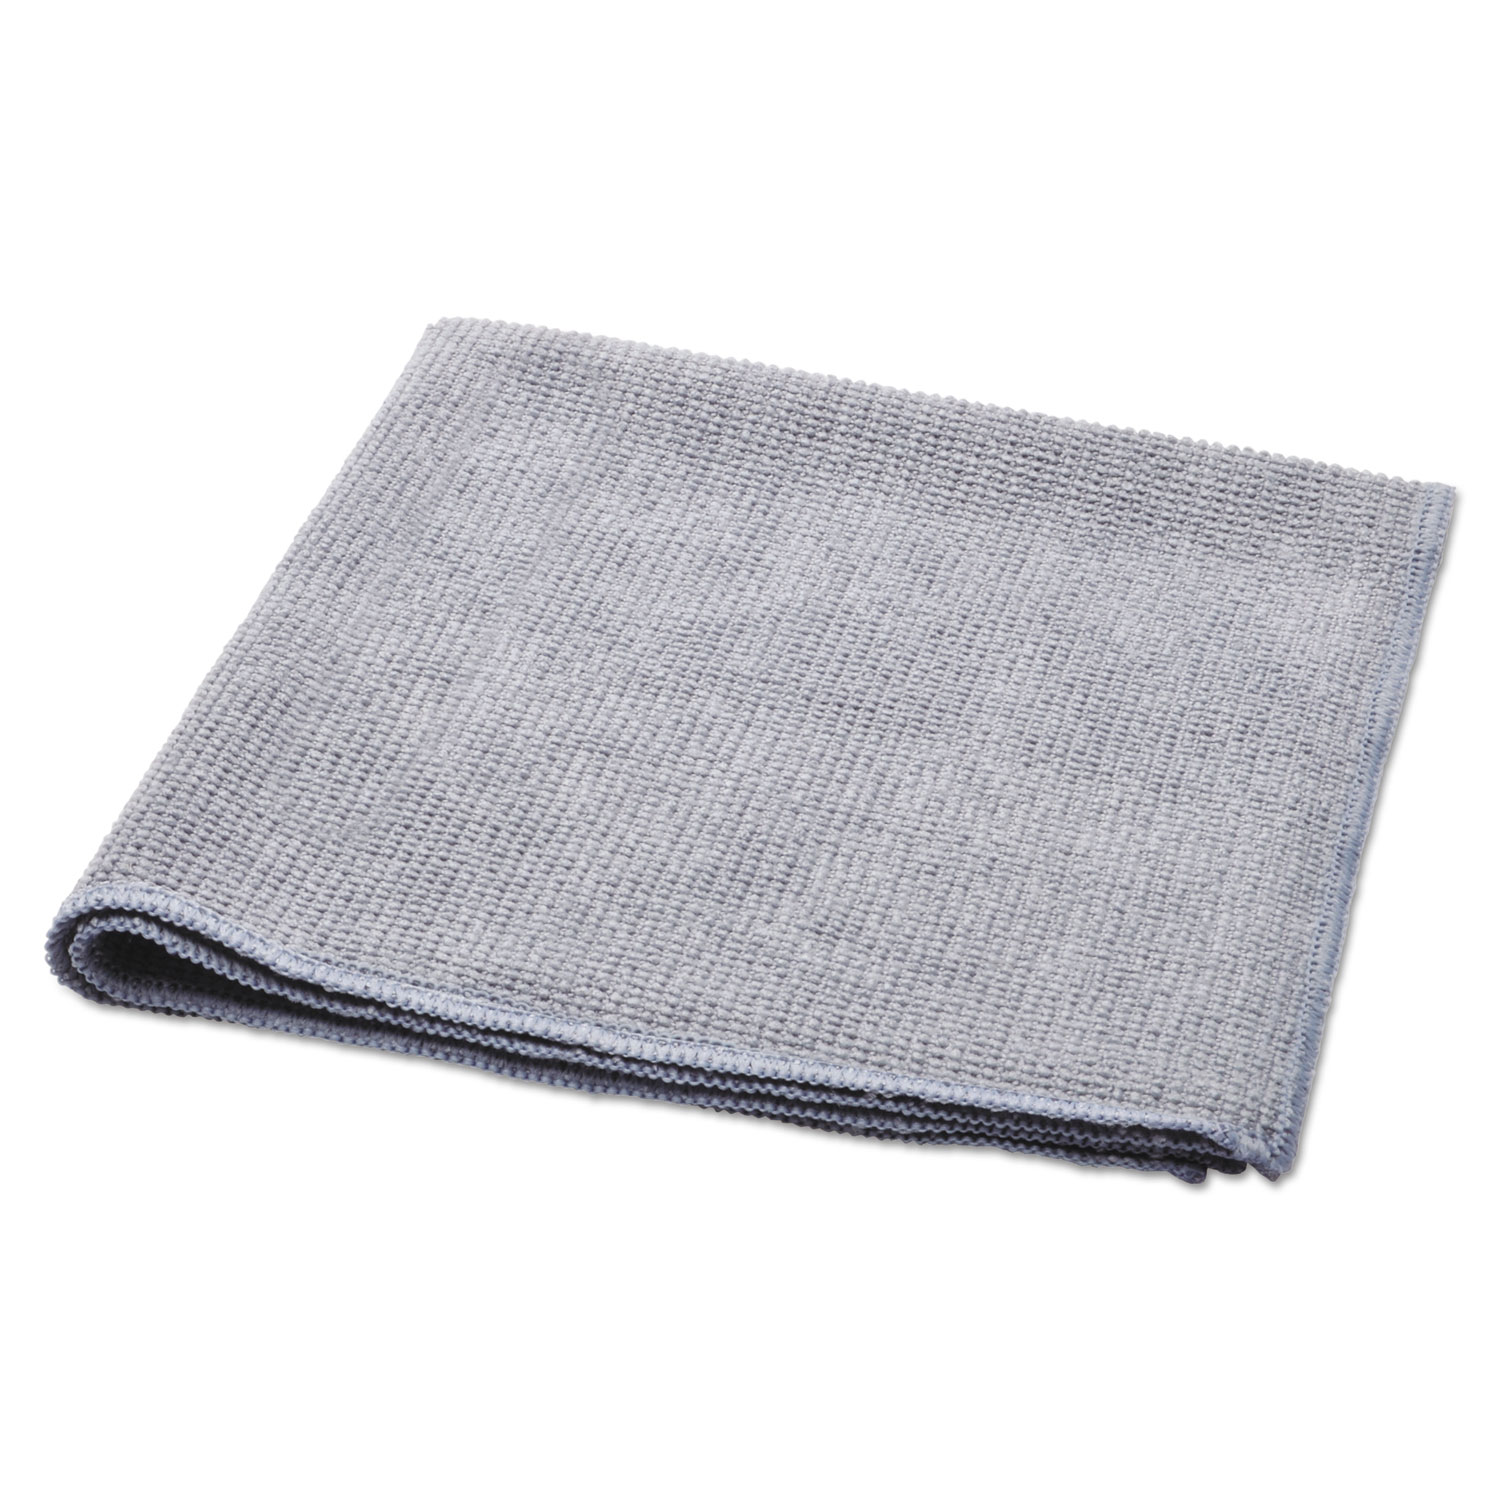 Dry Erase Cleaning Cloth, Fabric, 10 5/8w x 10 5/8d